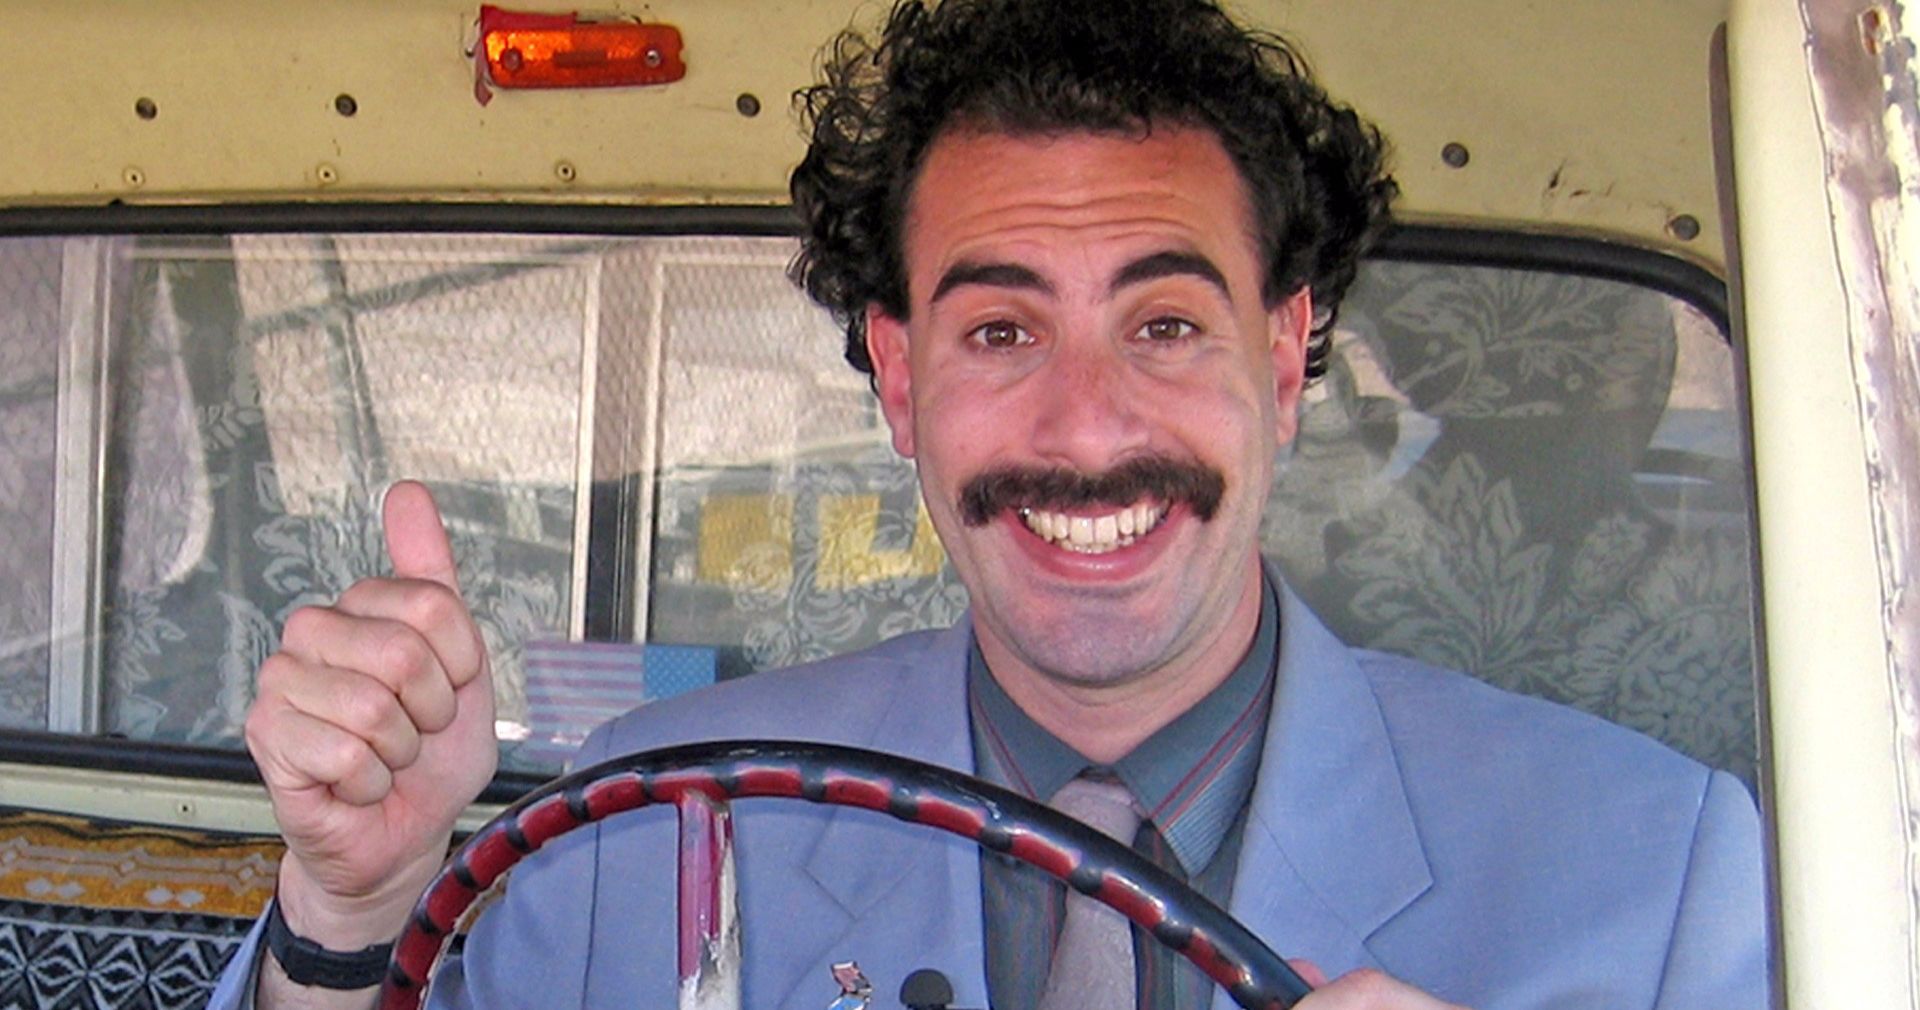 Borat Returns as Video Captures Sacha Baron Cohen Back in Iconic Disguise